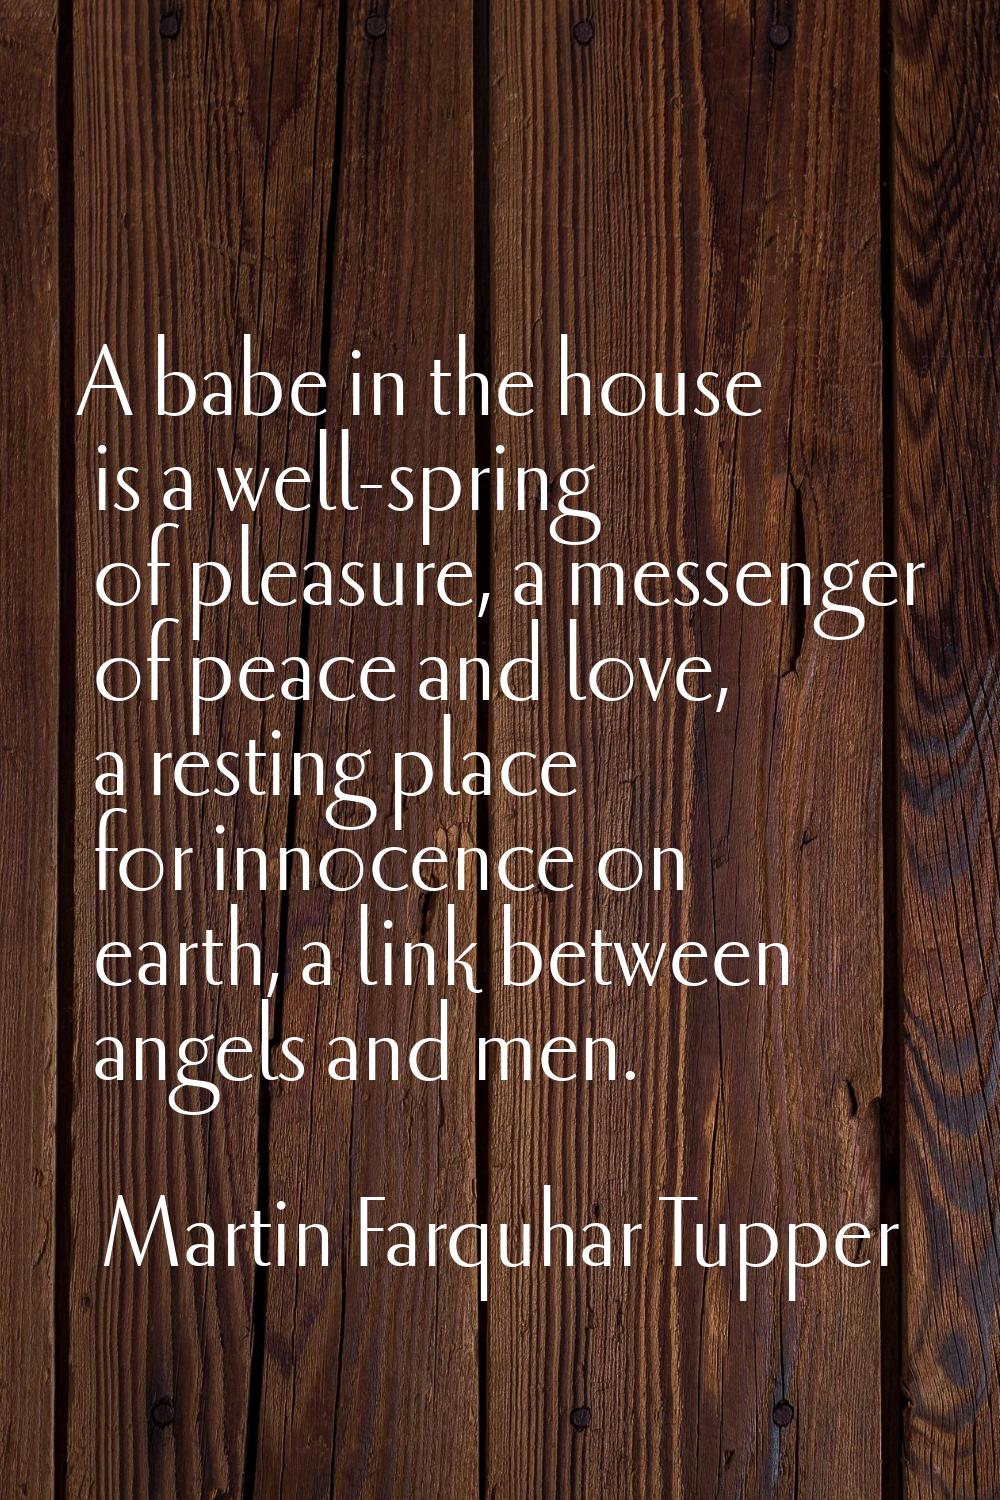 A babe in the house is a well-spring of pleasure, a messenger of peace and love, a resting place fo